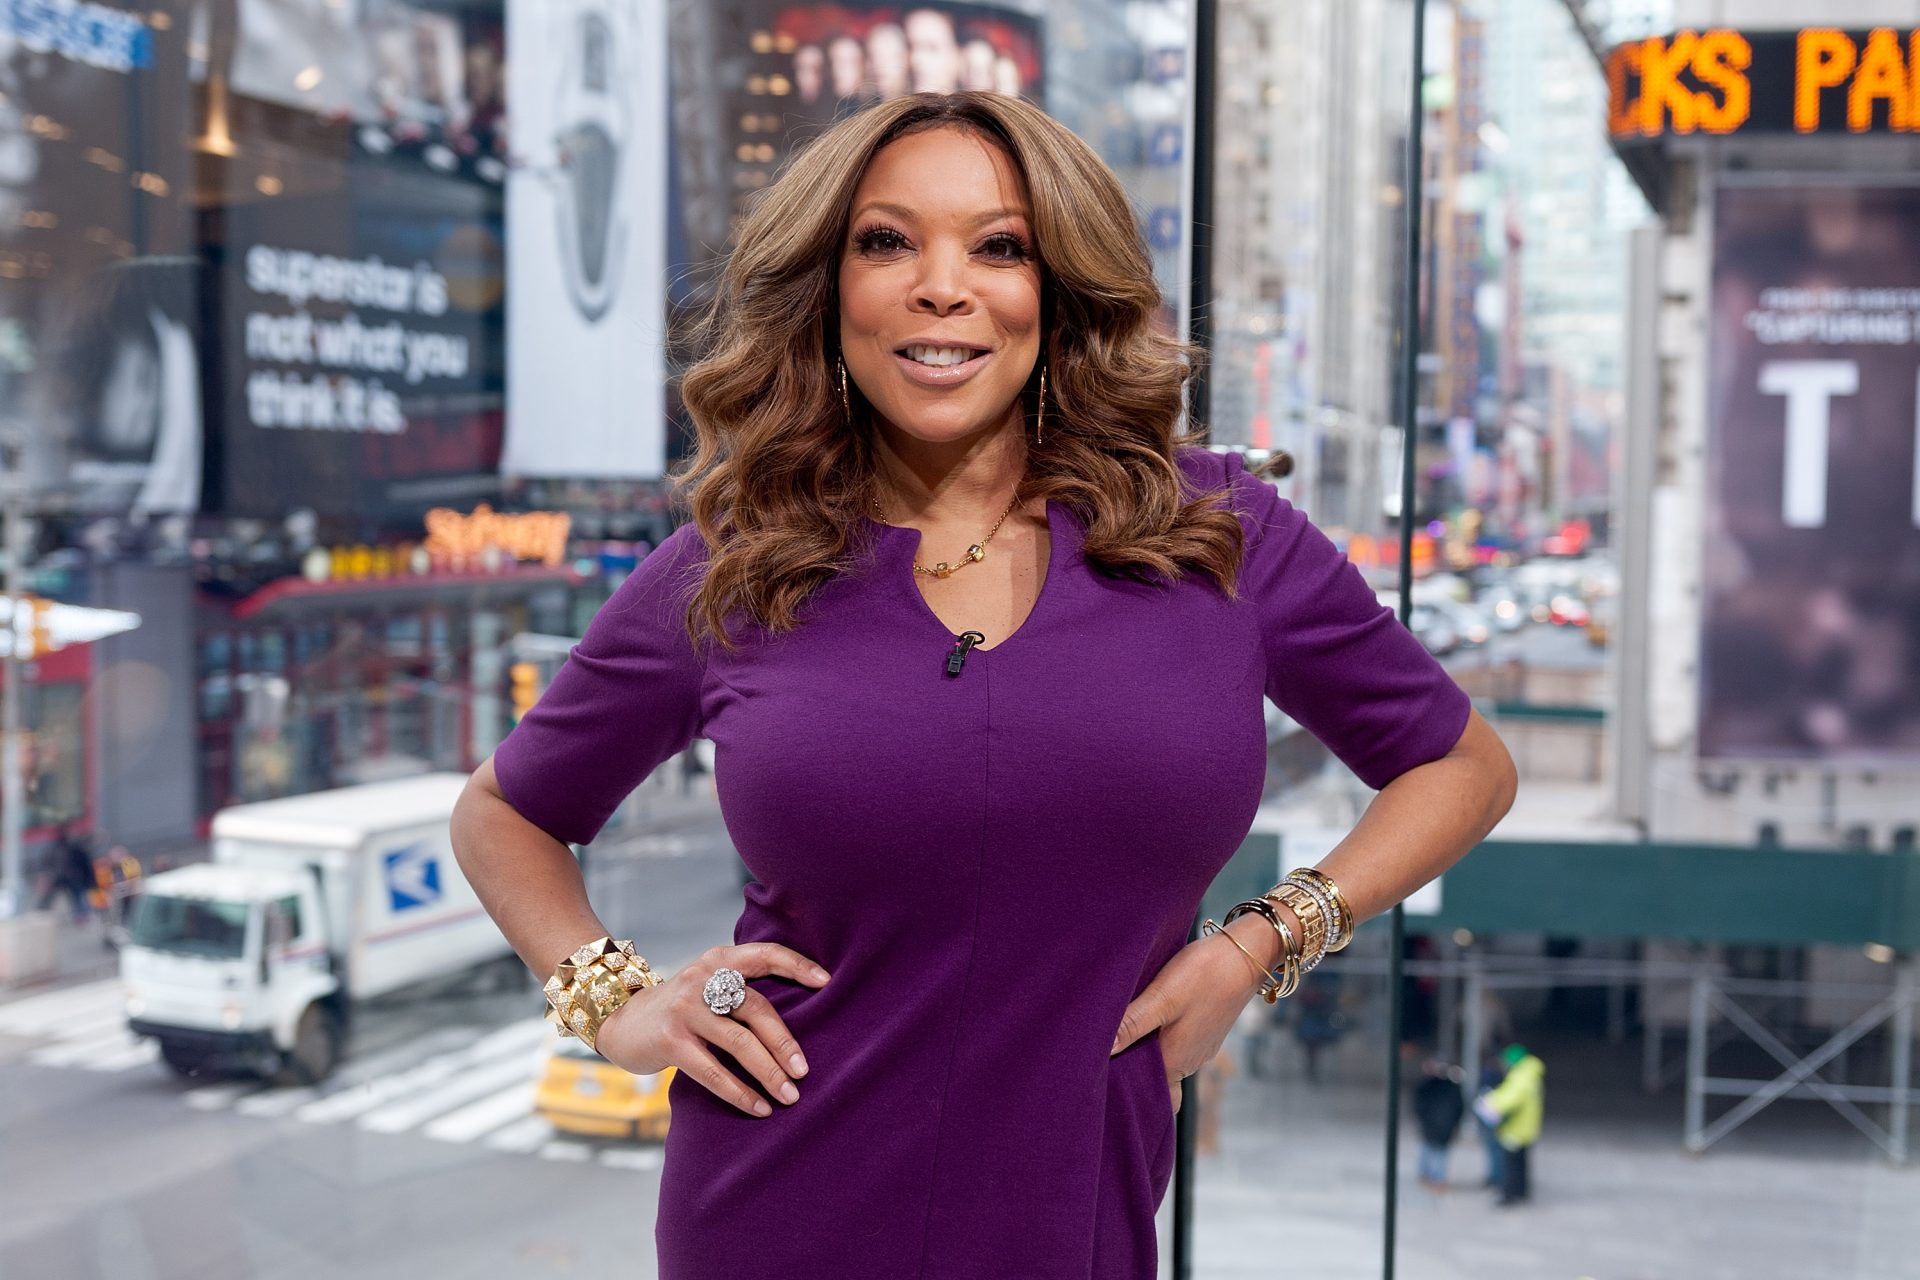 Wendy Williams rose to the top in the late 80s